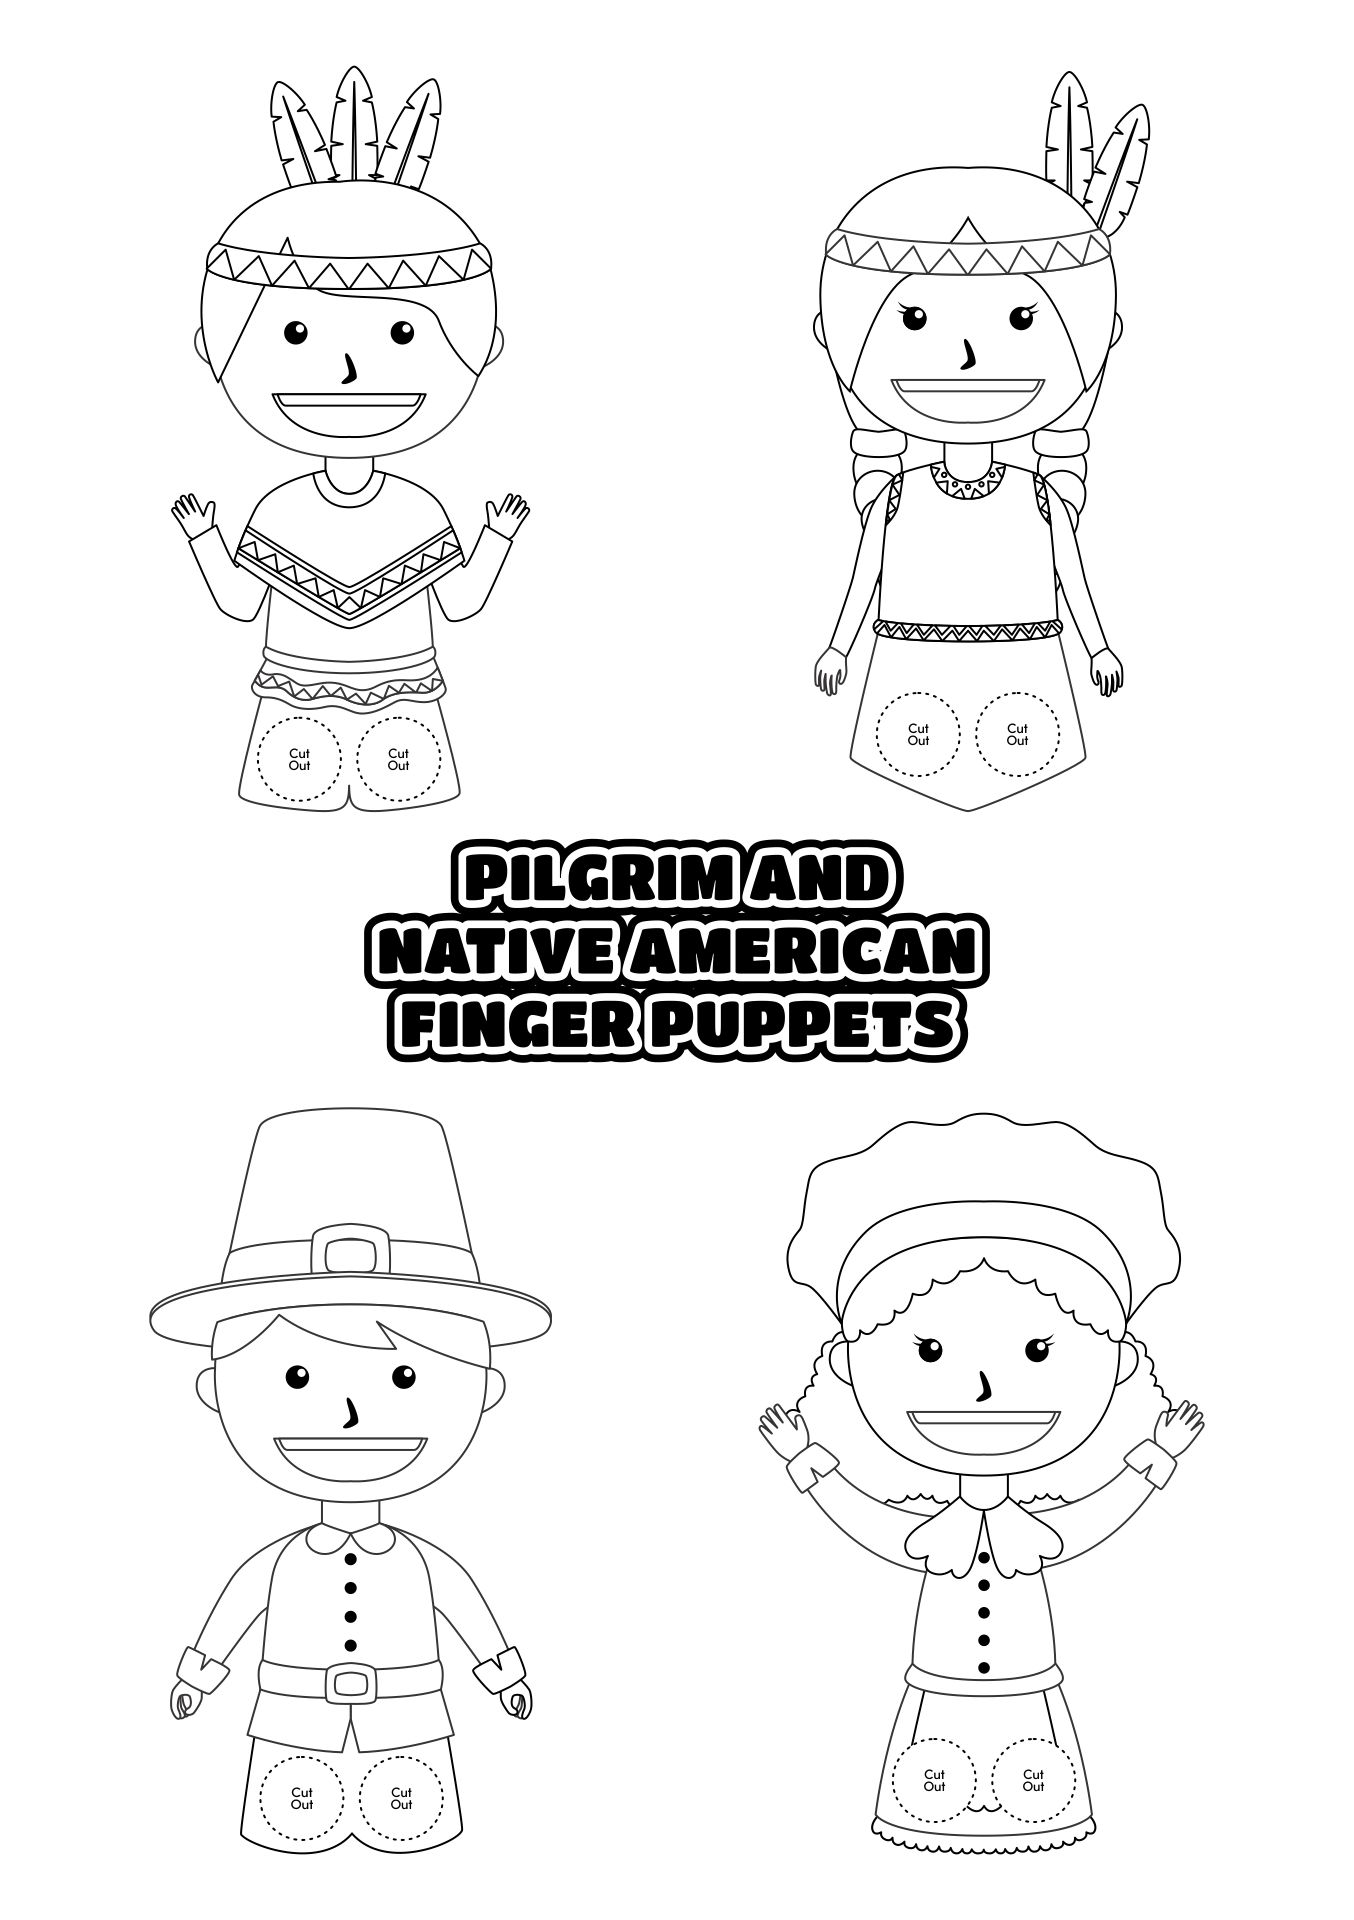 Pilgrim and Native American Puppets